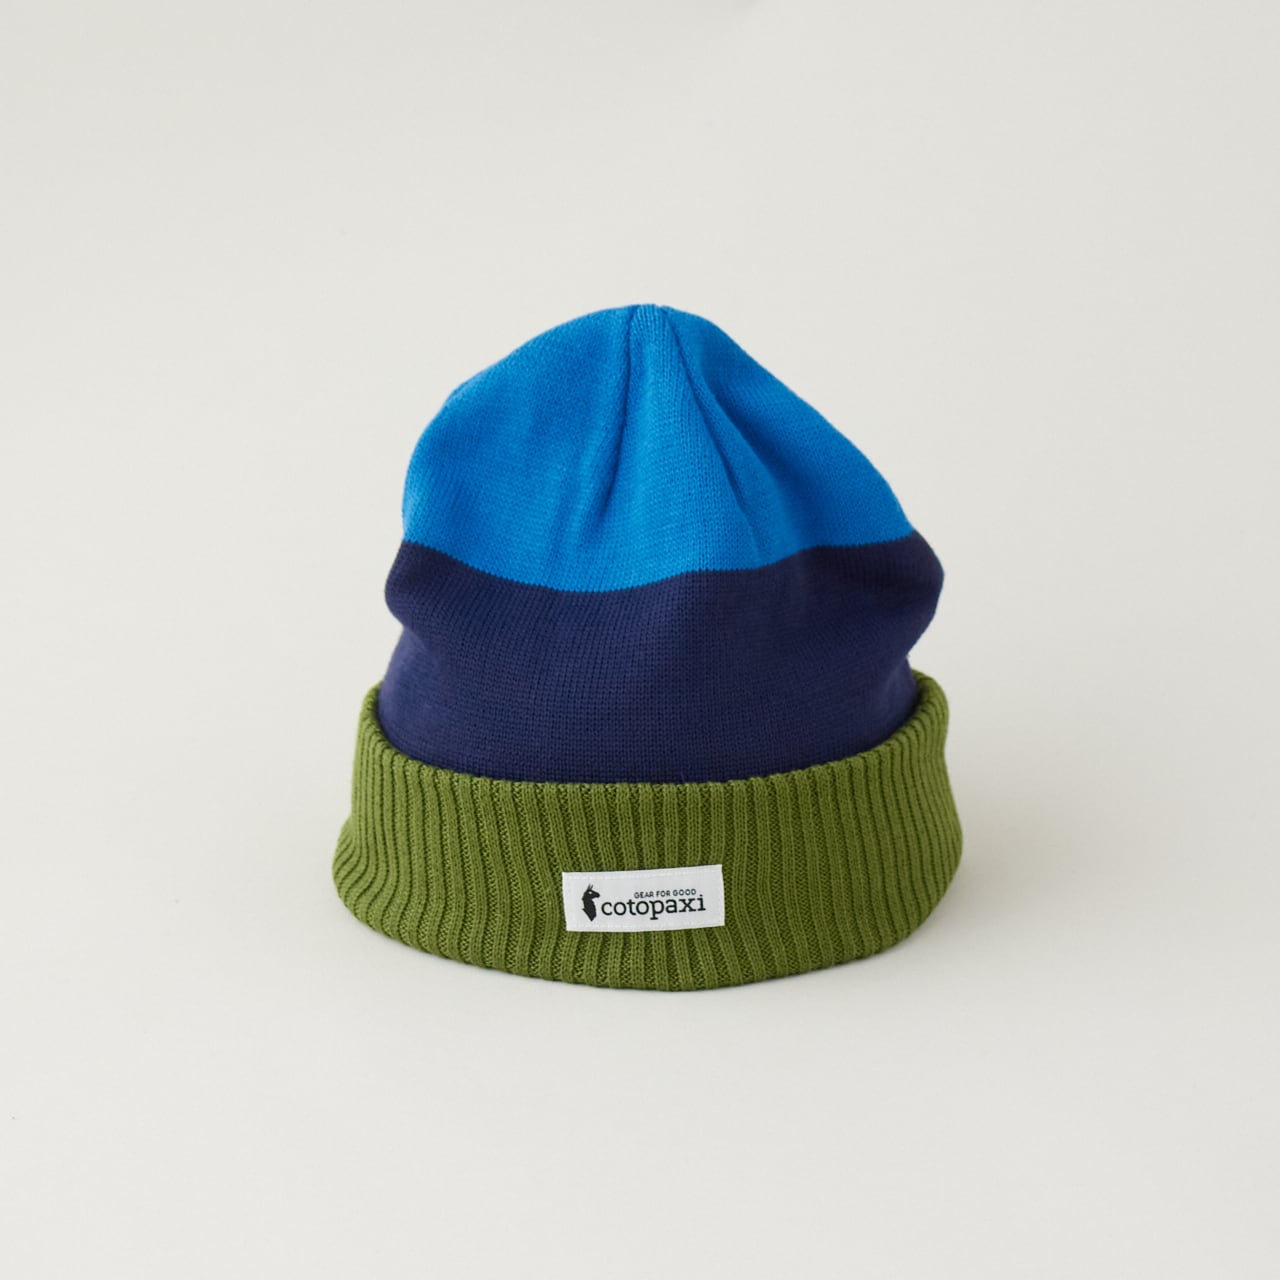 cotopaxi(コトパクシ) Alto Beanie - Forest/Maritime